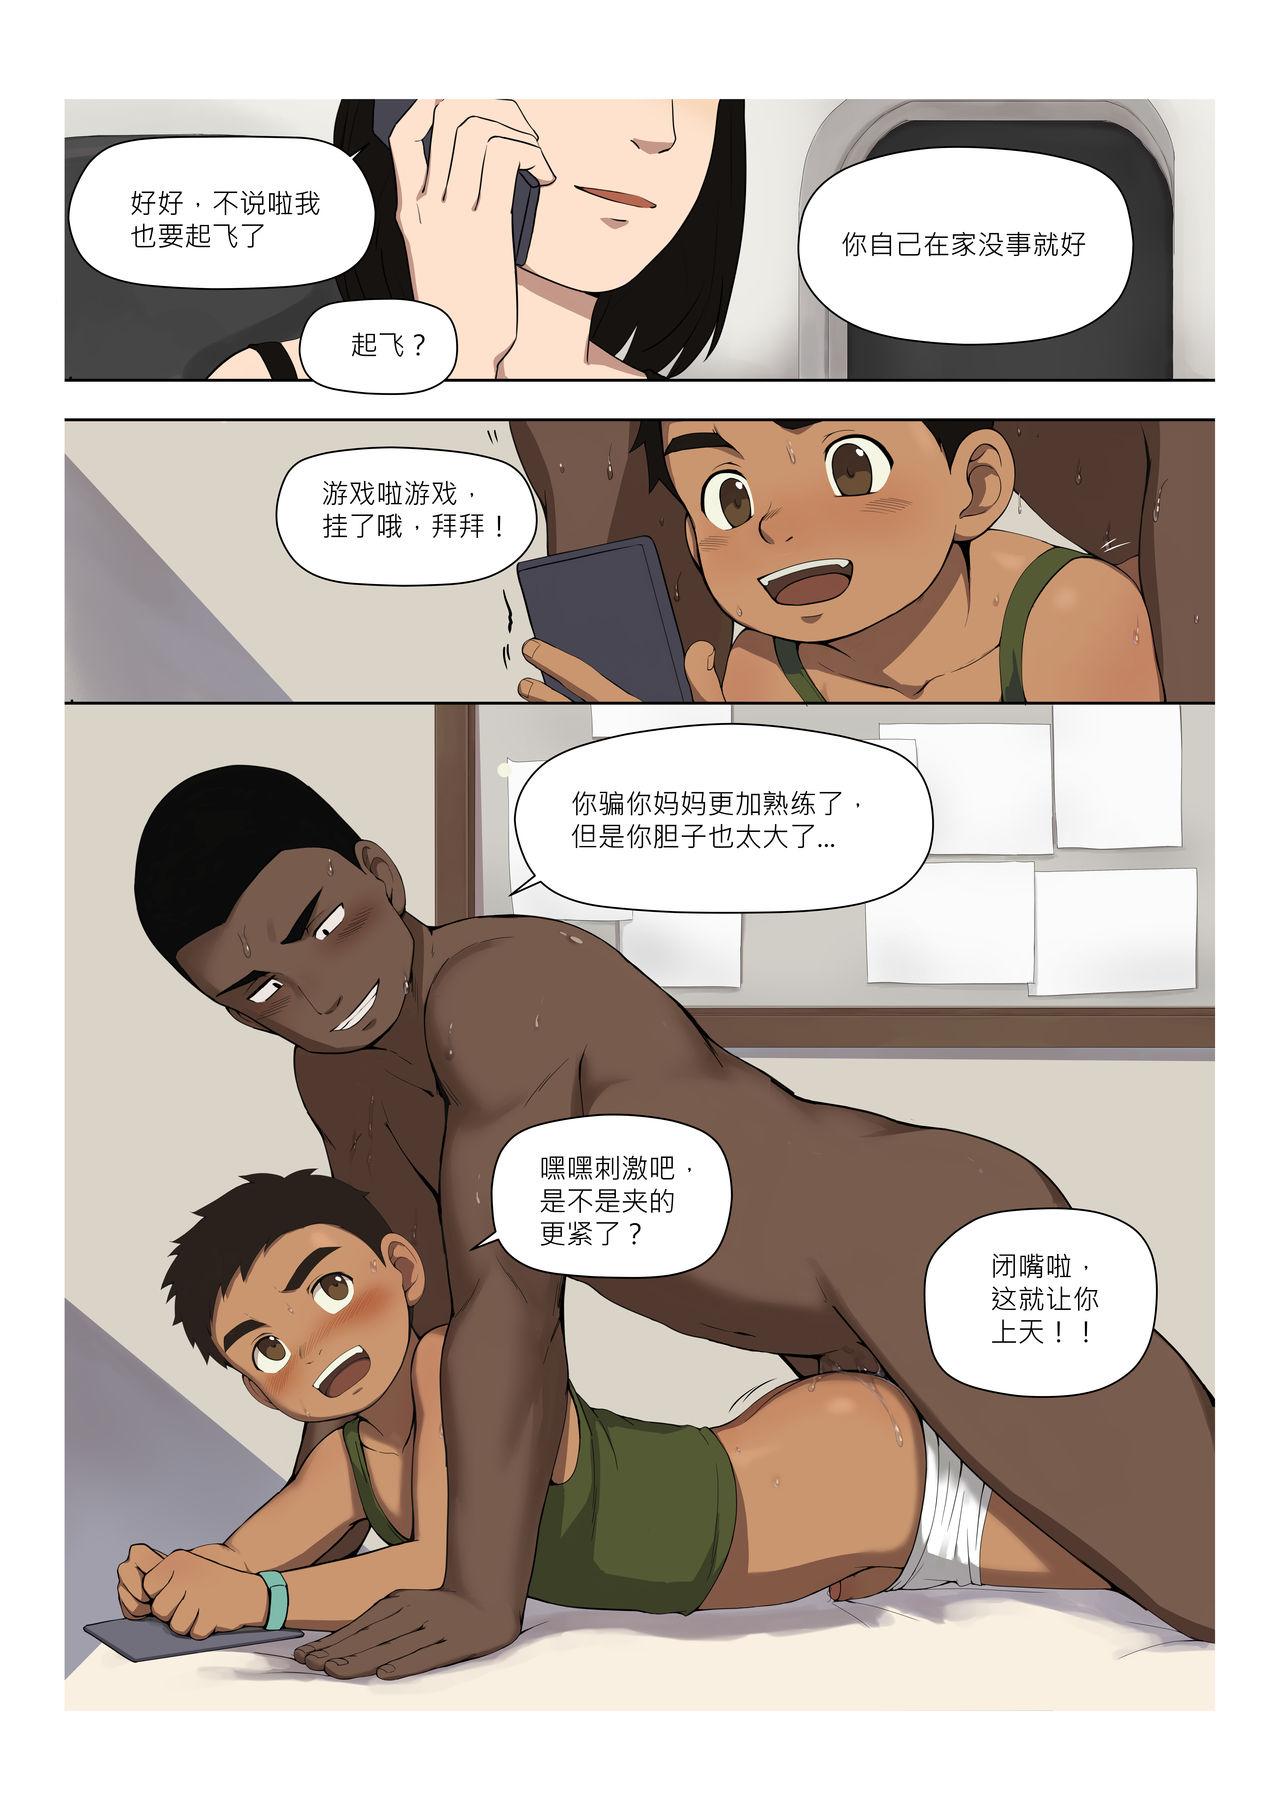 Vagina Reap What You Sow - 自业自得 Delicia - Page 42